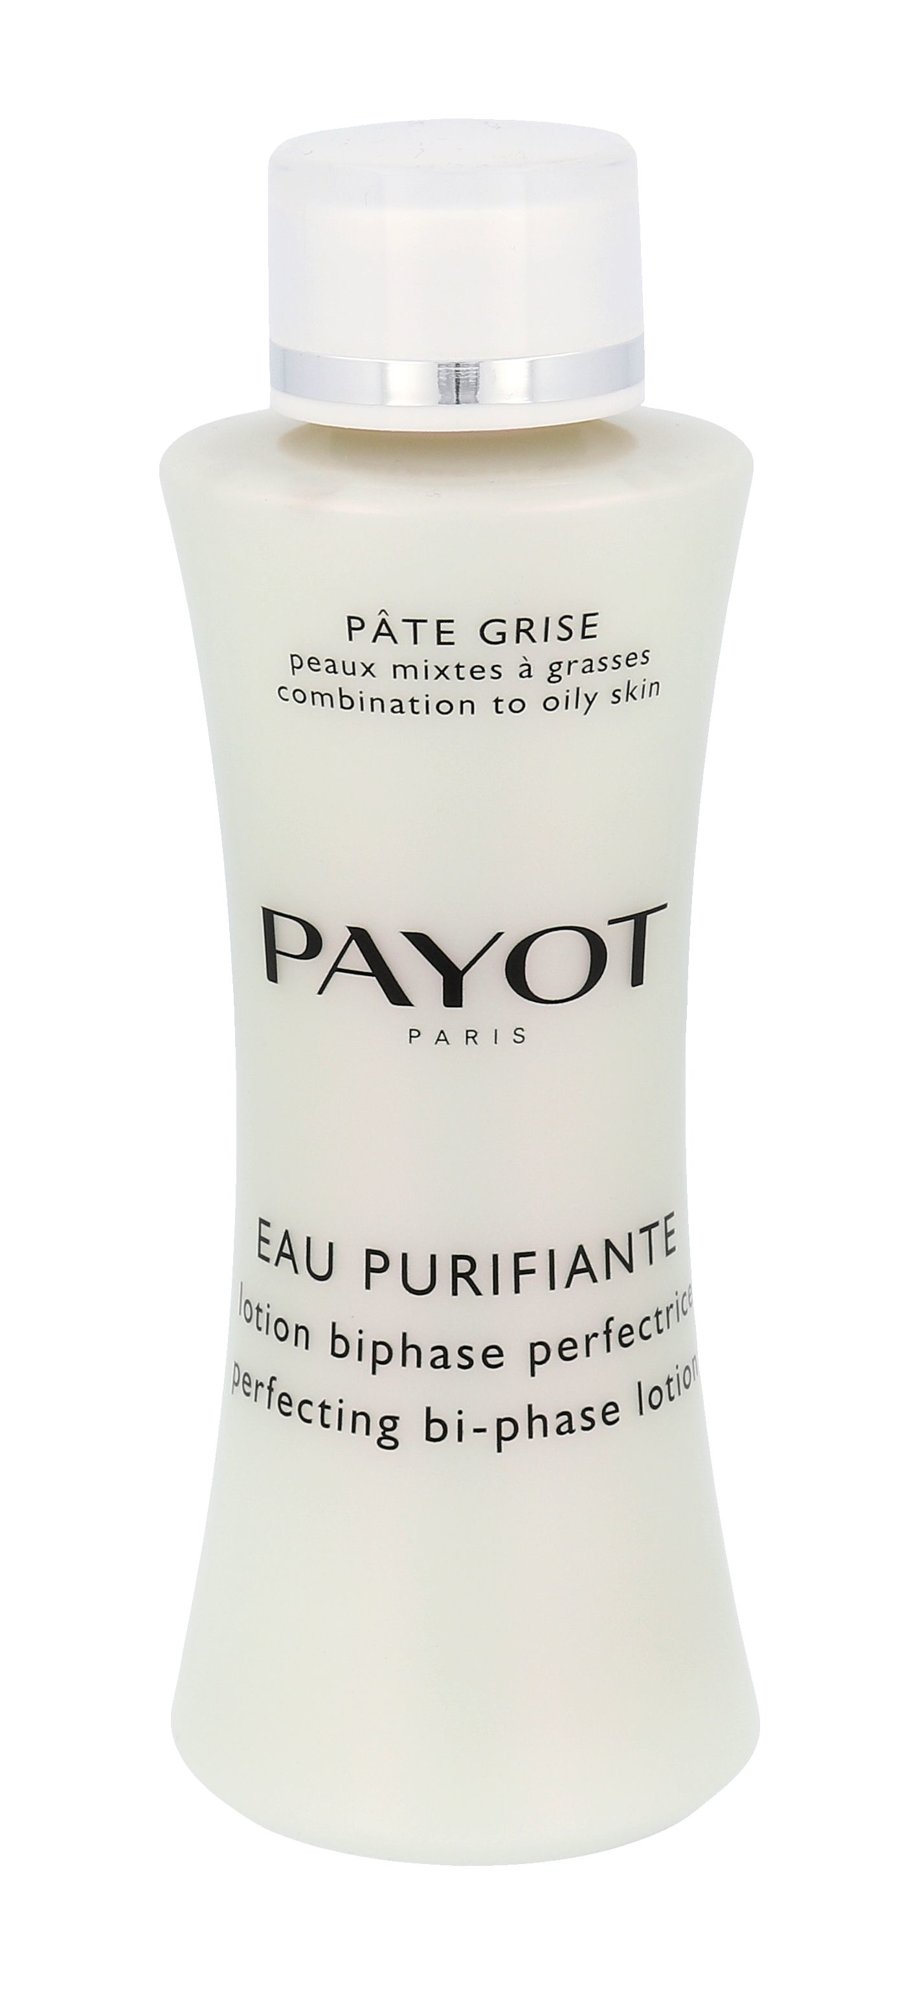 Payot Pate Grise Perfecting Bi-Phase Lotion